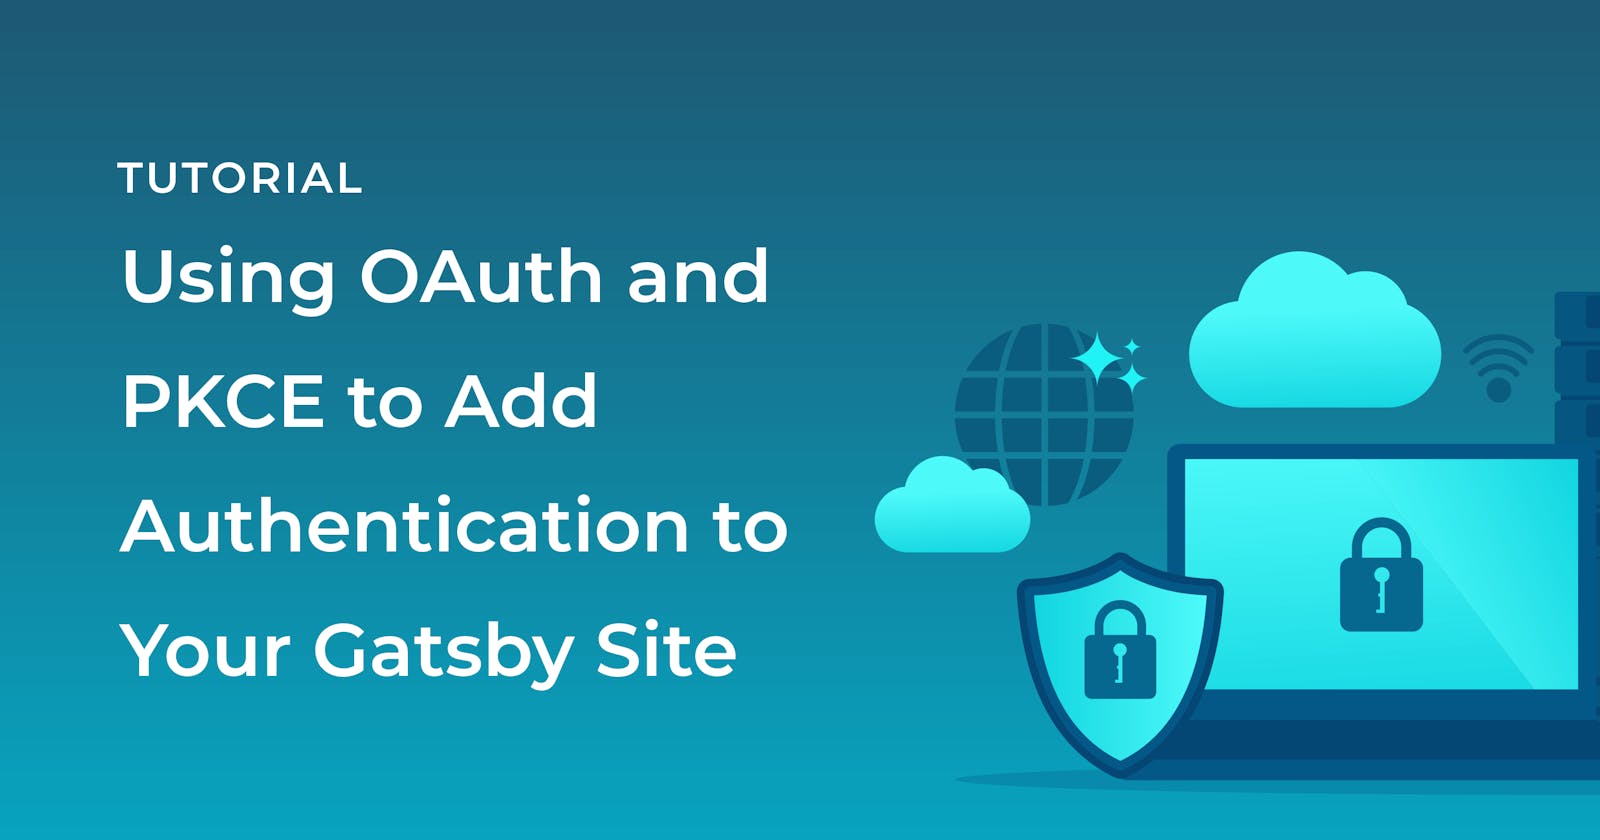 Using OAuth and PKCE to Add Authentication to Your Gatsby Site